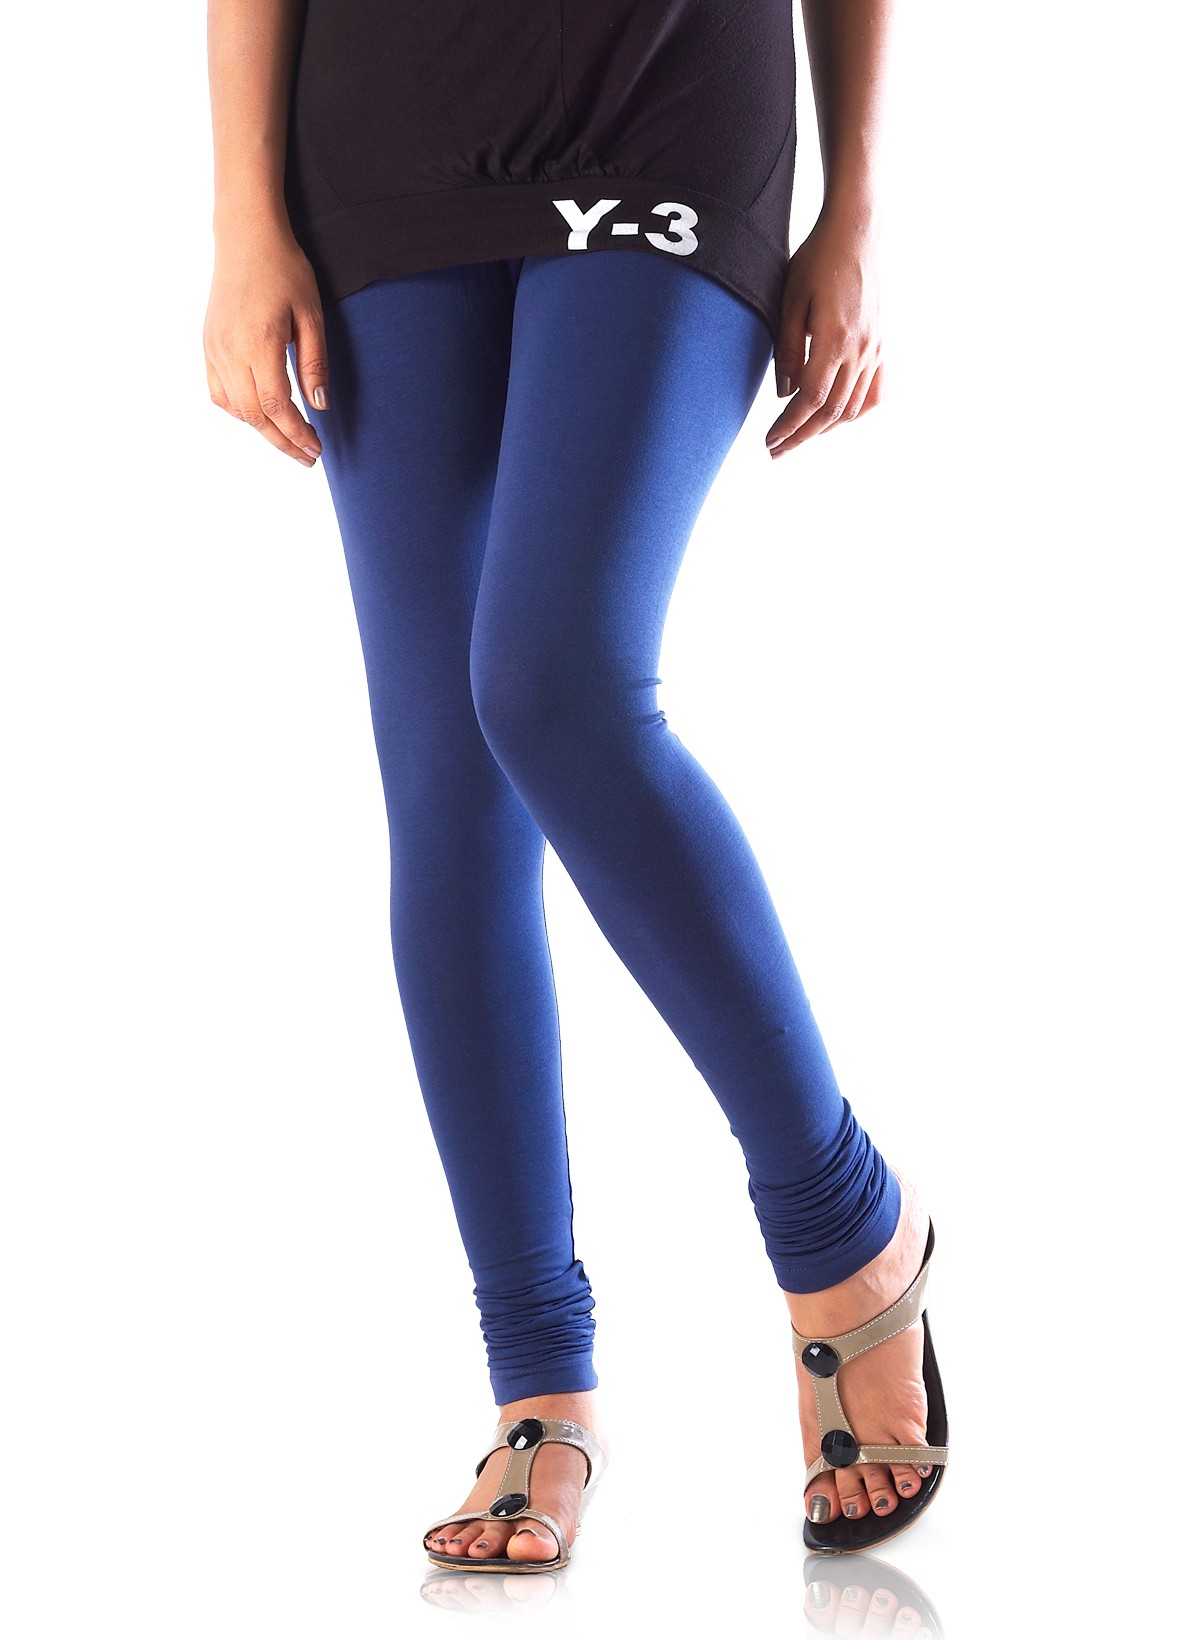 Buy Stretch Churidar Leggings Online at Best Prices in India